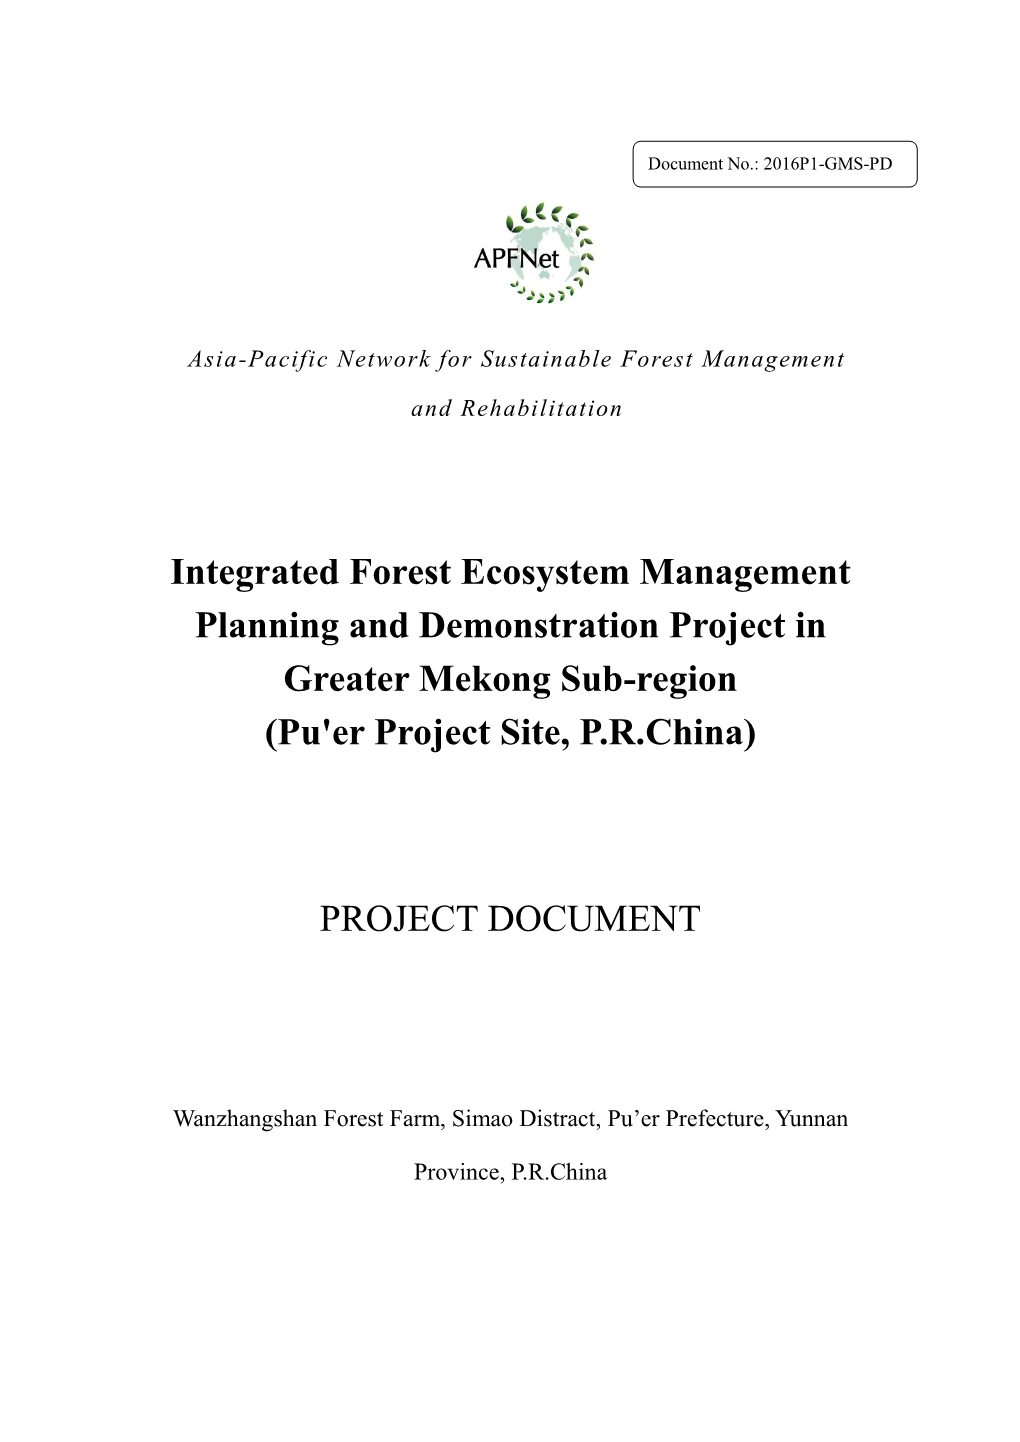 Integrated Forest Ecosystem Management Planning and Demonstration Project in Greater Mekong Sub-Region (Pu'er Project Site, P.R.China)